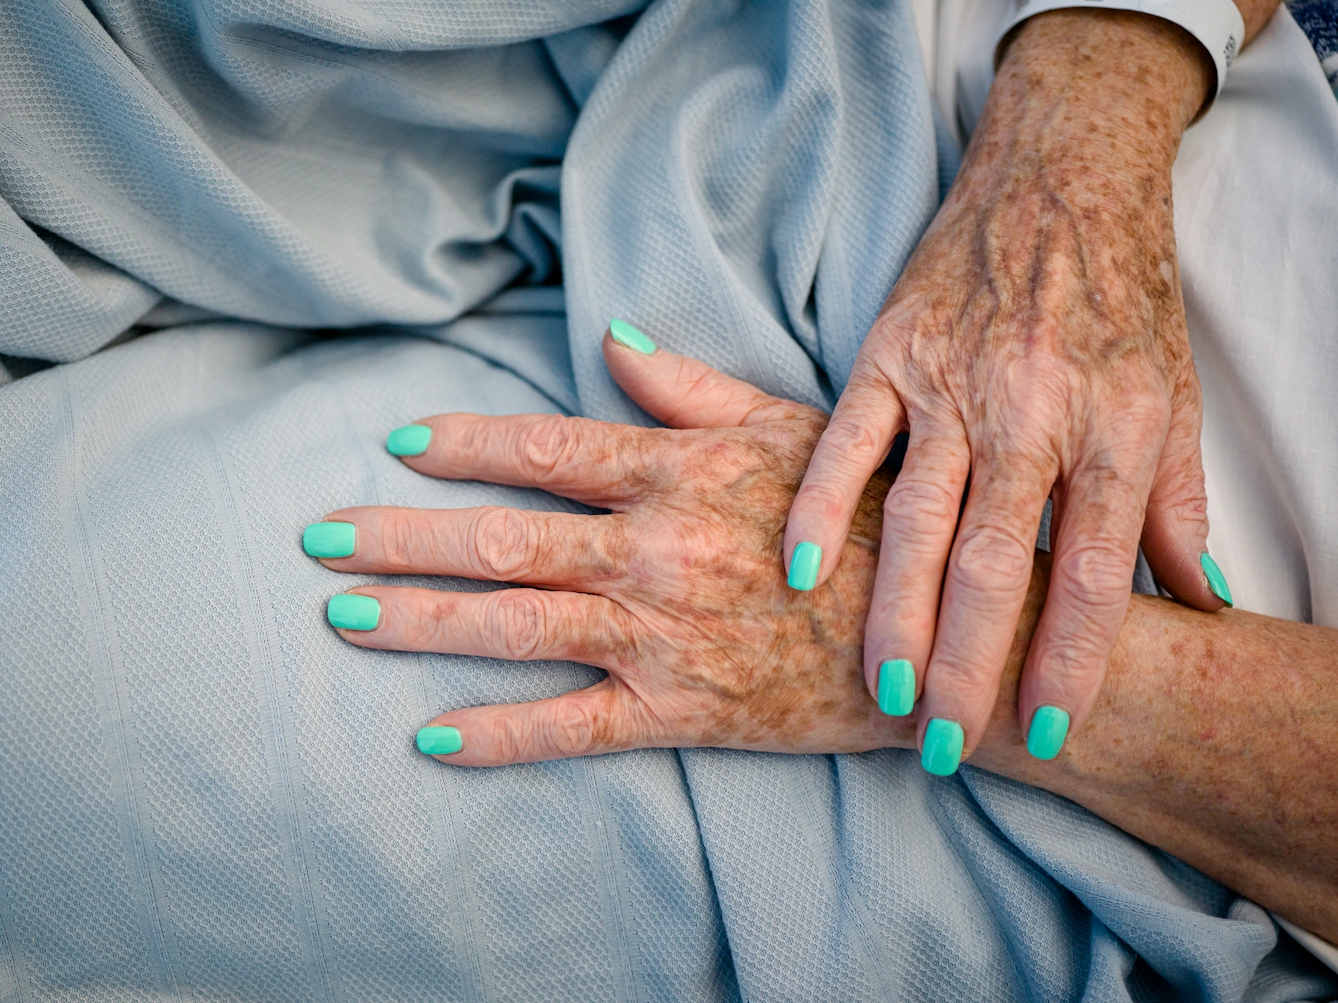 Photograph of the hands of a patient with bright turquoise painted fingernails, resting on a light blue hospital bedsheet. 